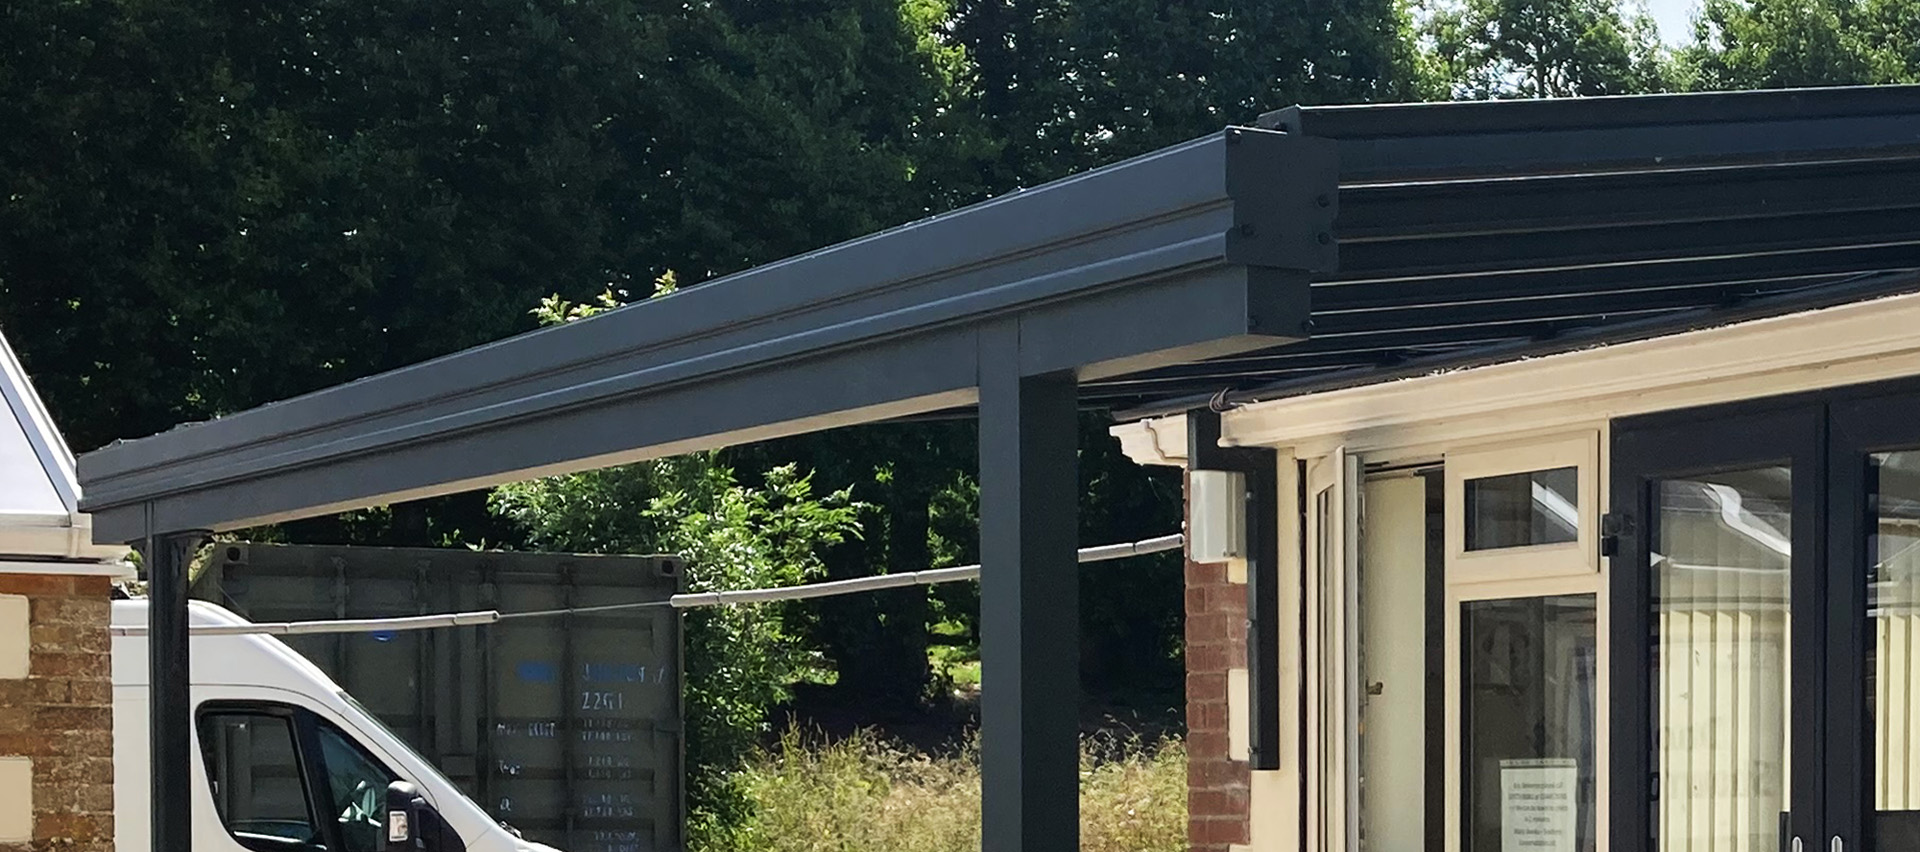 showsite-simplicty6-glass roof-anthracite grey textured ral7016-traditional-victorian-north perrett-somerset